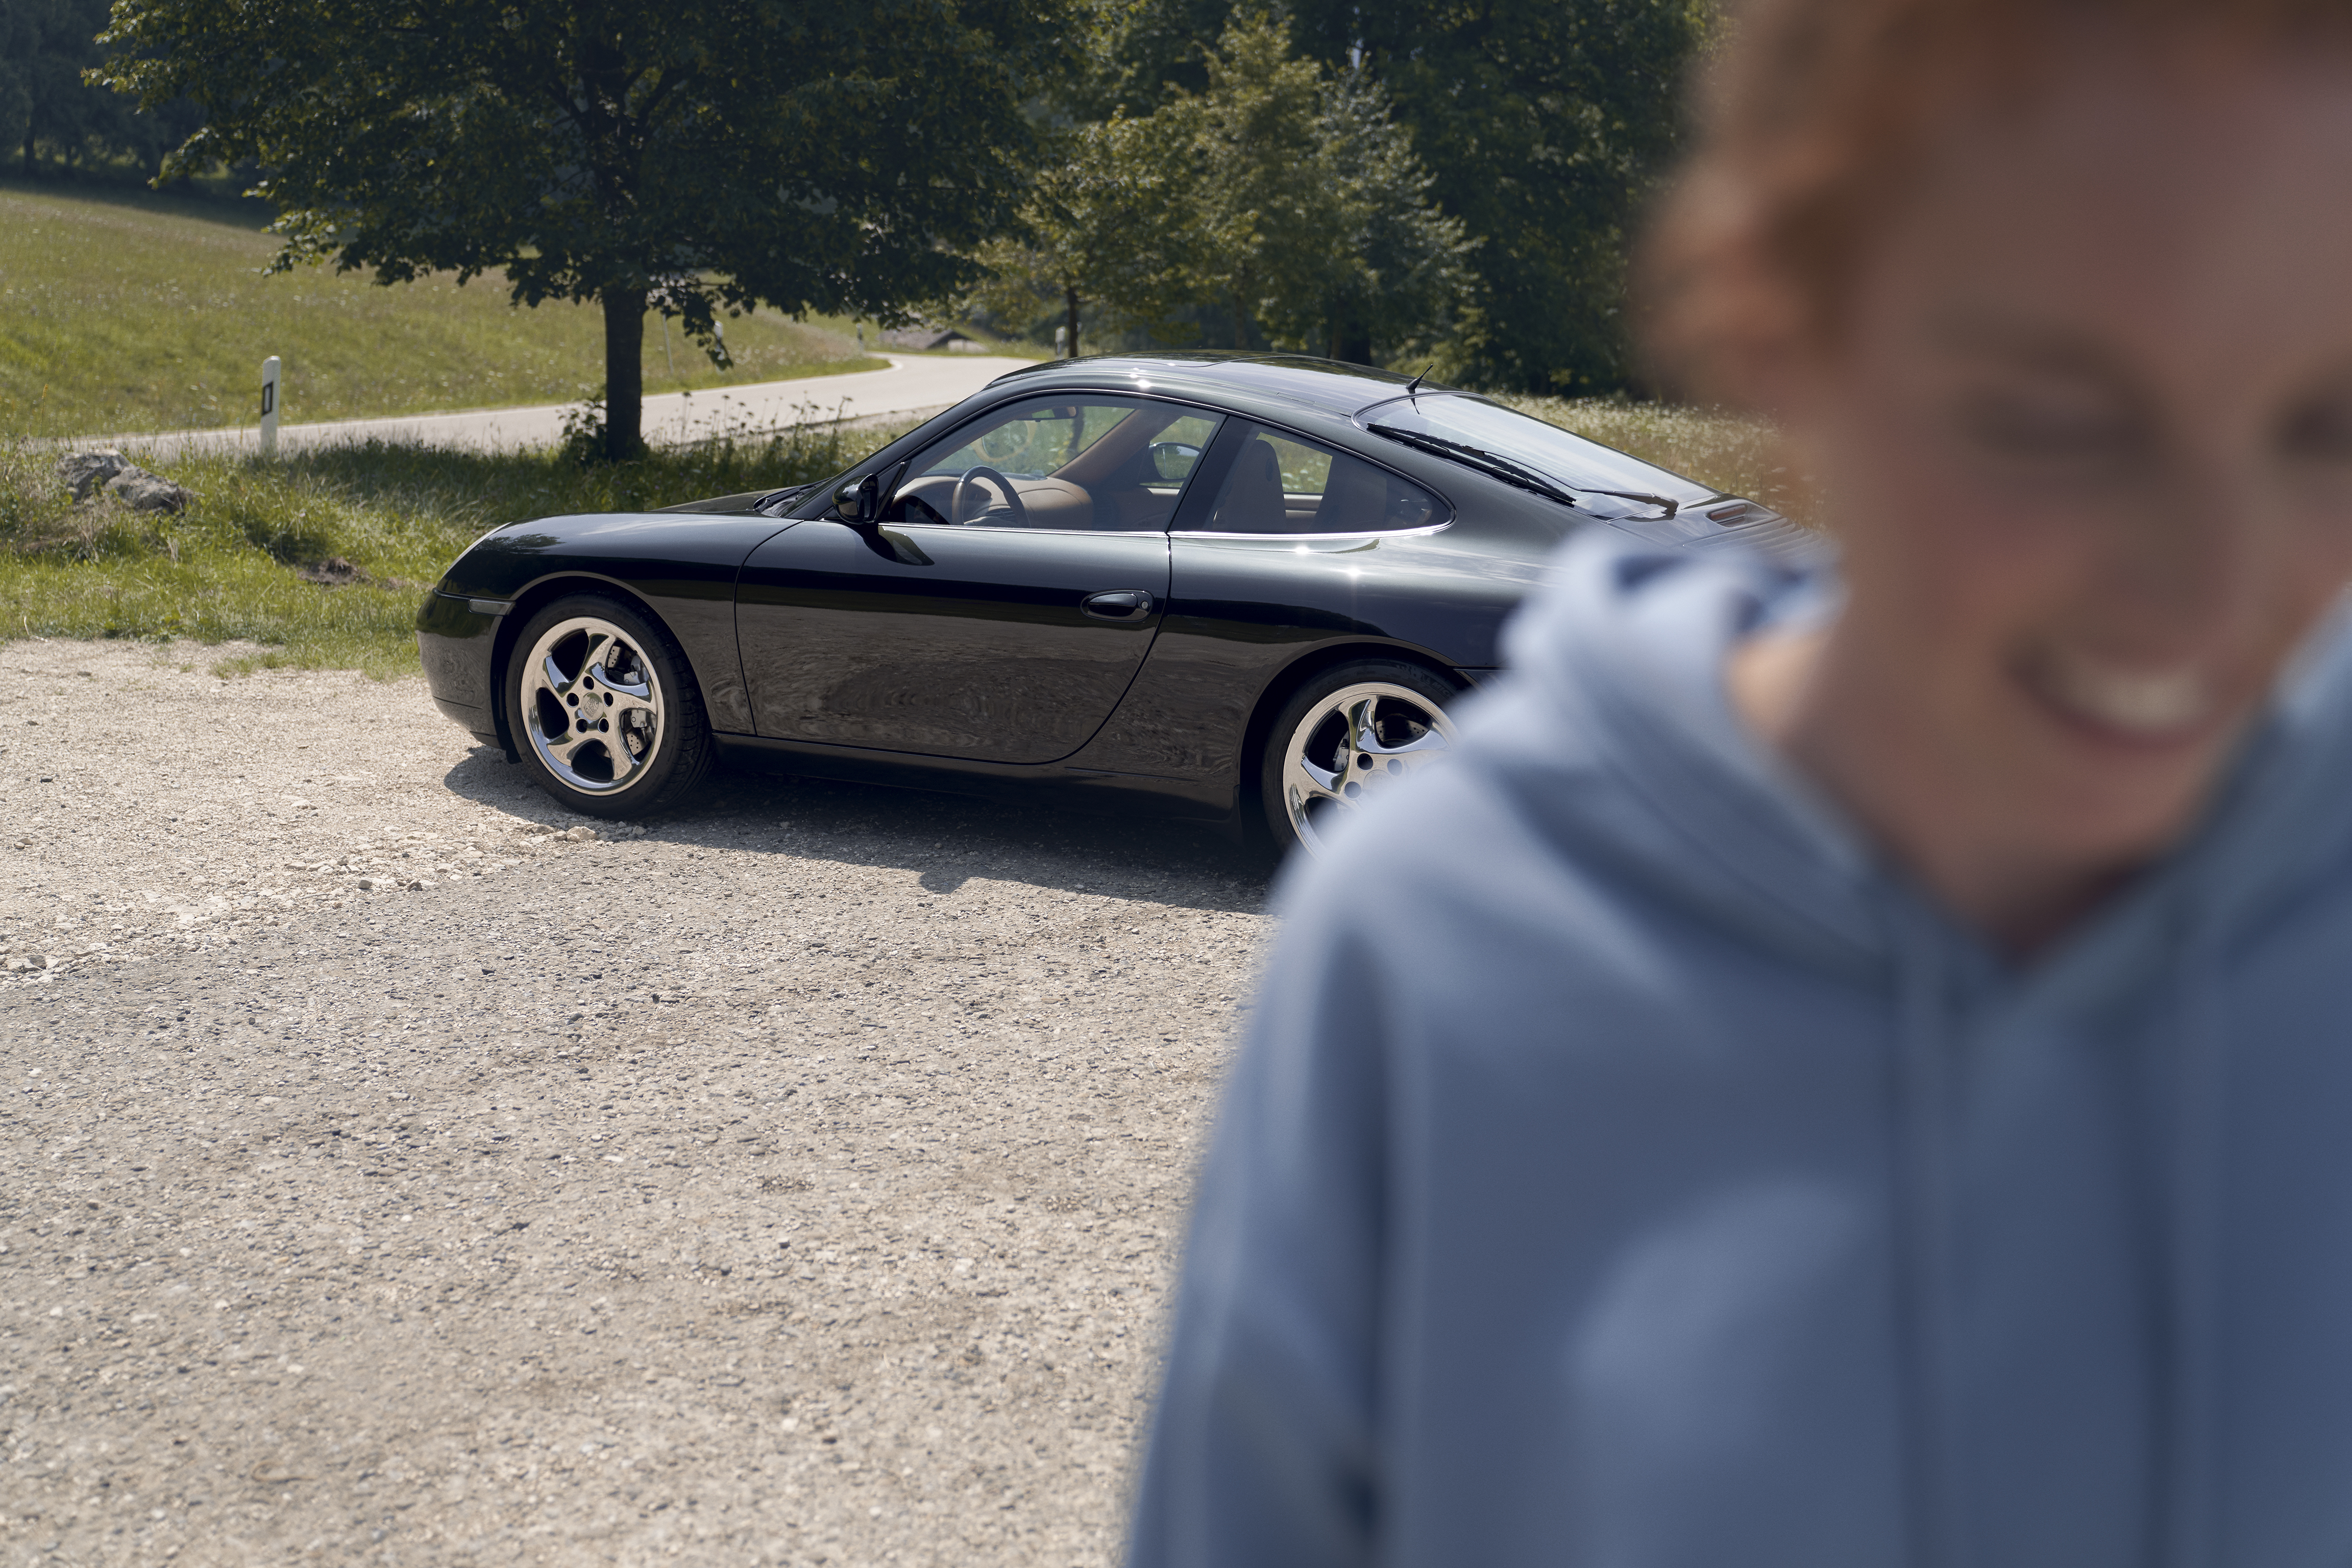 Dark blue 996 Carrera in sunlight, smiling woman in foreground